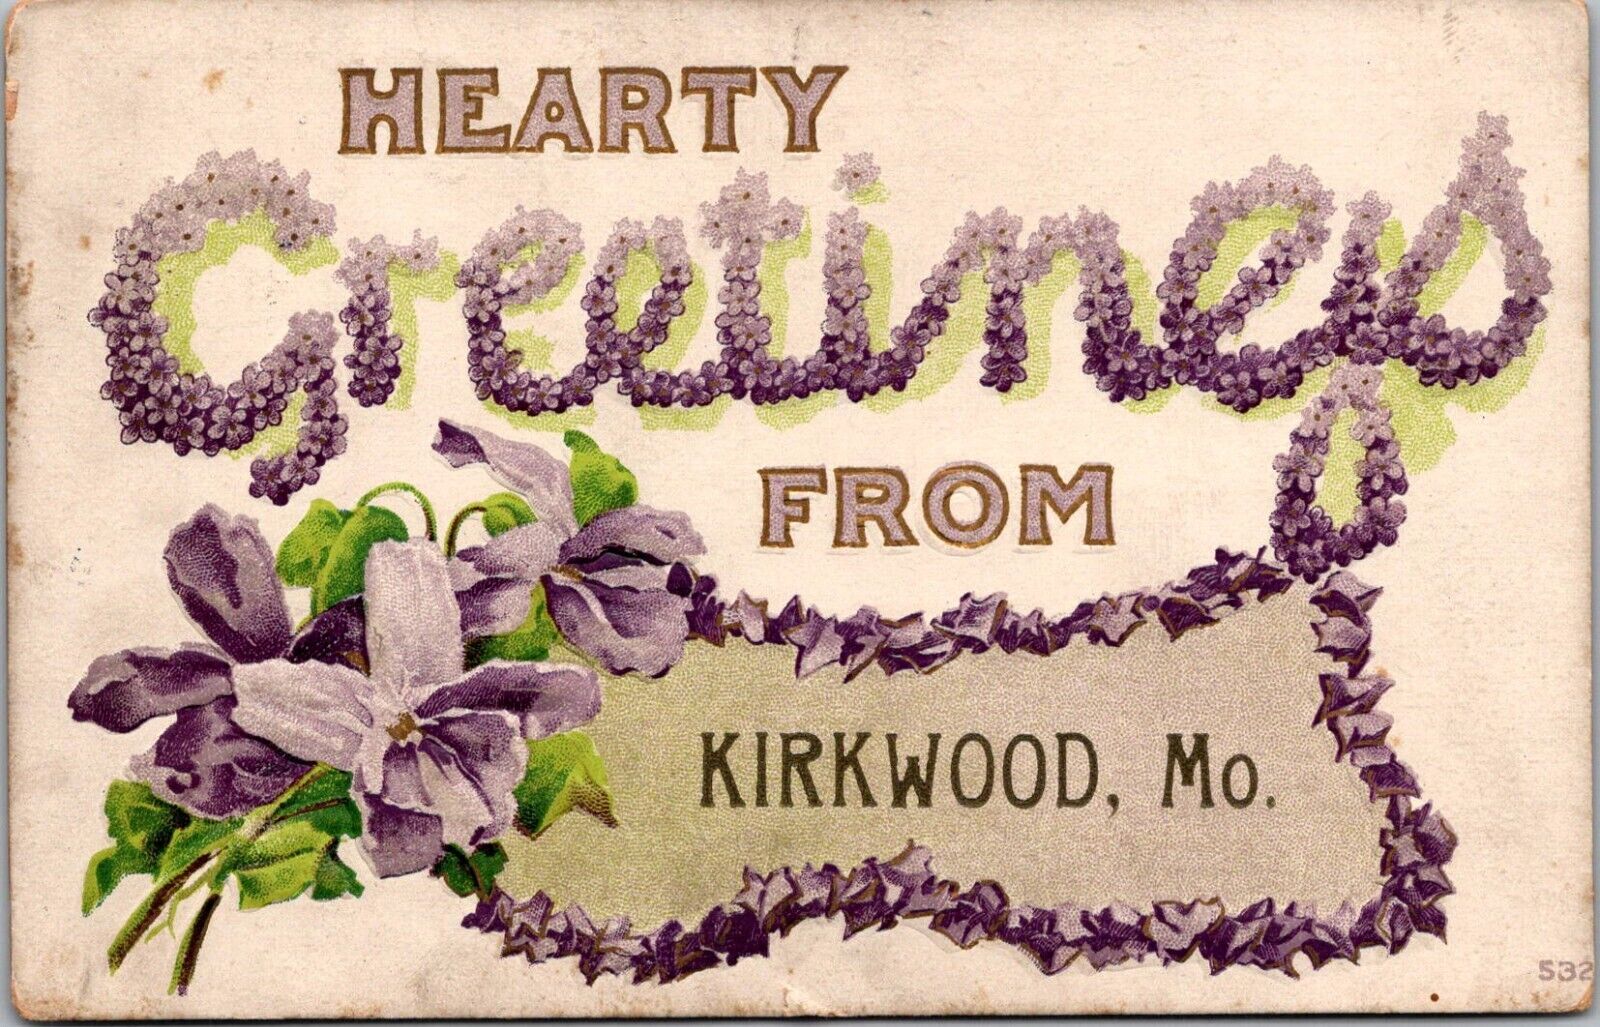 VTG 1911 POSTCARD HEARTY GREETINGS FROM KIRKWOOD MO TO BIDDLE ST., ST LOUIS, MO